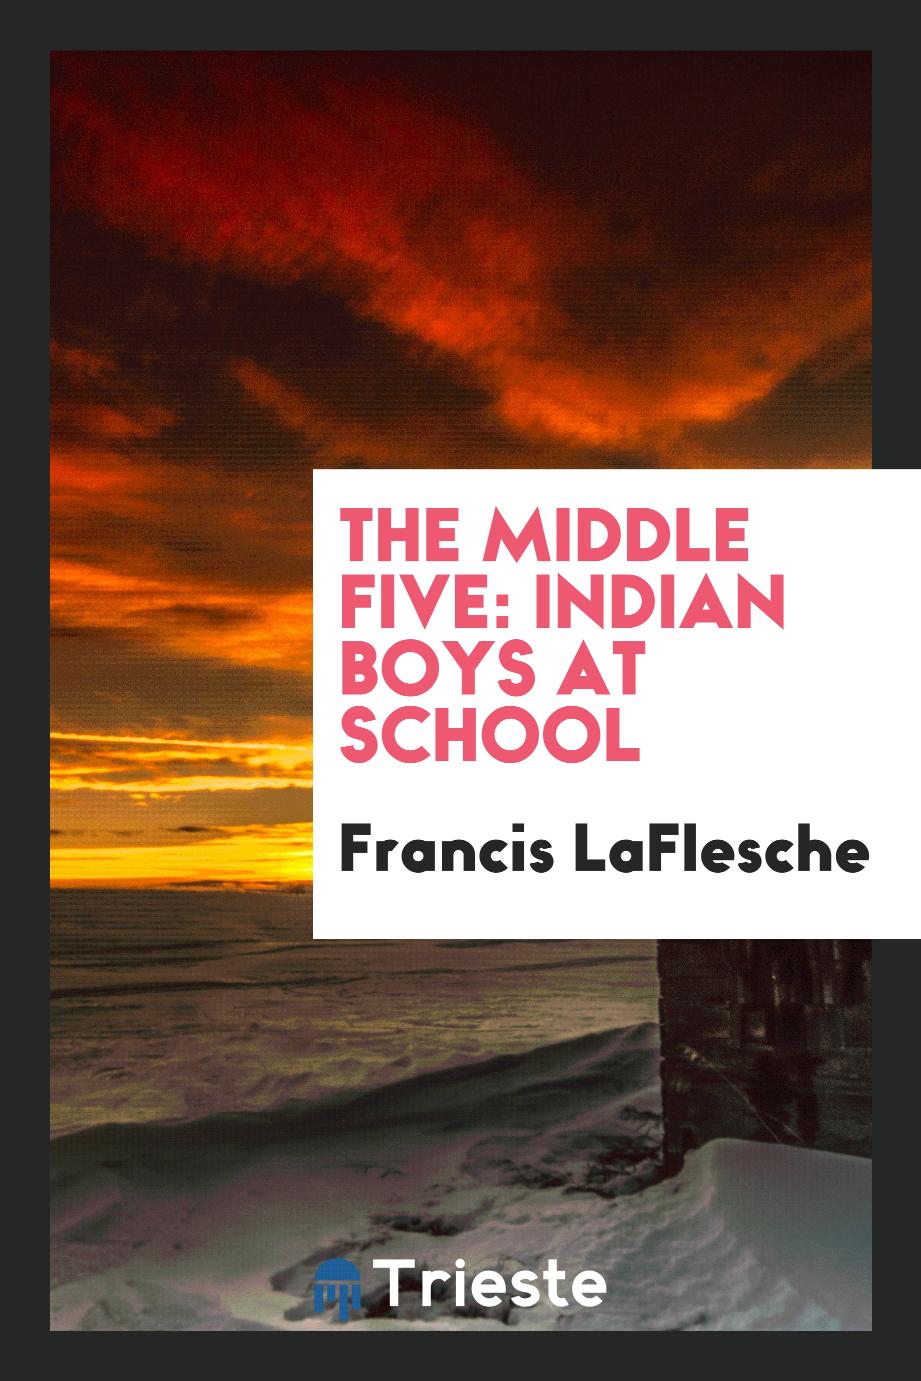 Francis LaFlesche - The middle five: Indian boys at school